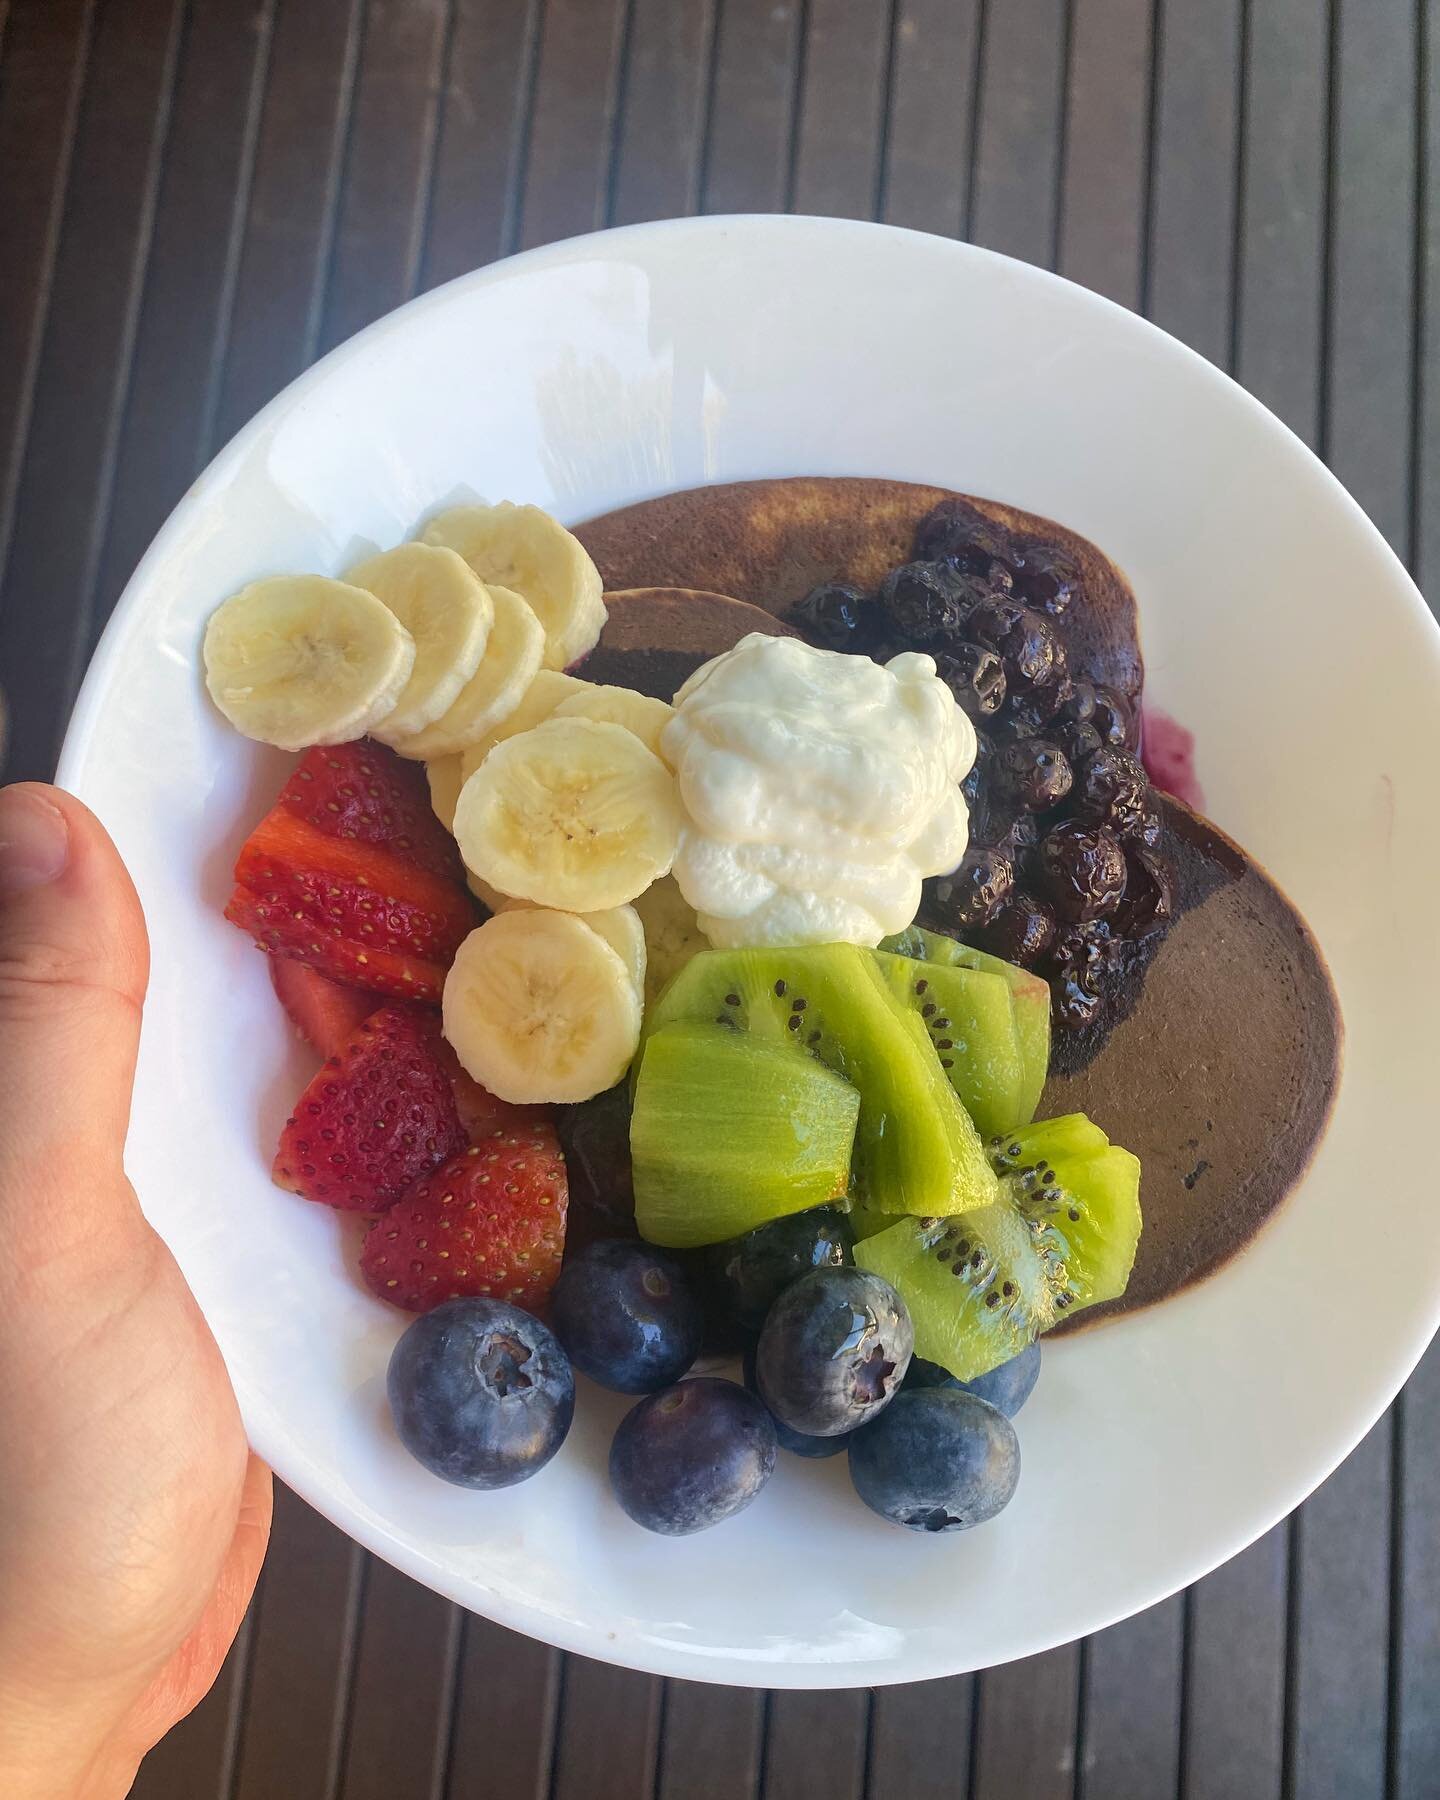 Taking a break from the usual porridge to enjoy some perfectly loaded protein pancakes. 

🥞 Protein pancakes made w/ @trueprotein choc PB powder, rolled oats, egg, chia seeds + vanilla.
🥝 Kiwi - great for the bowel movements.
🍓 Strawbs &amp; blueb